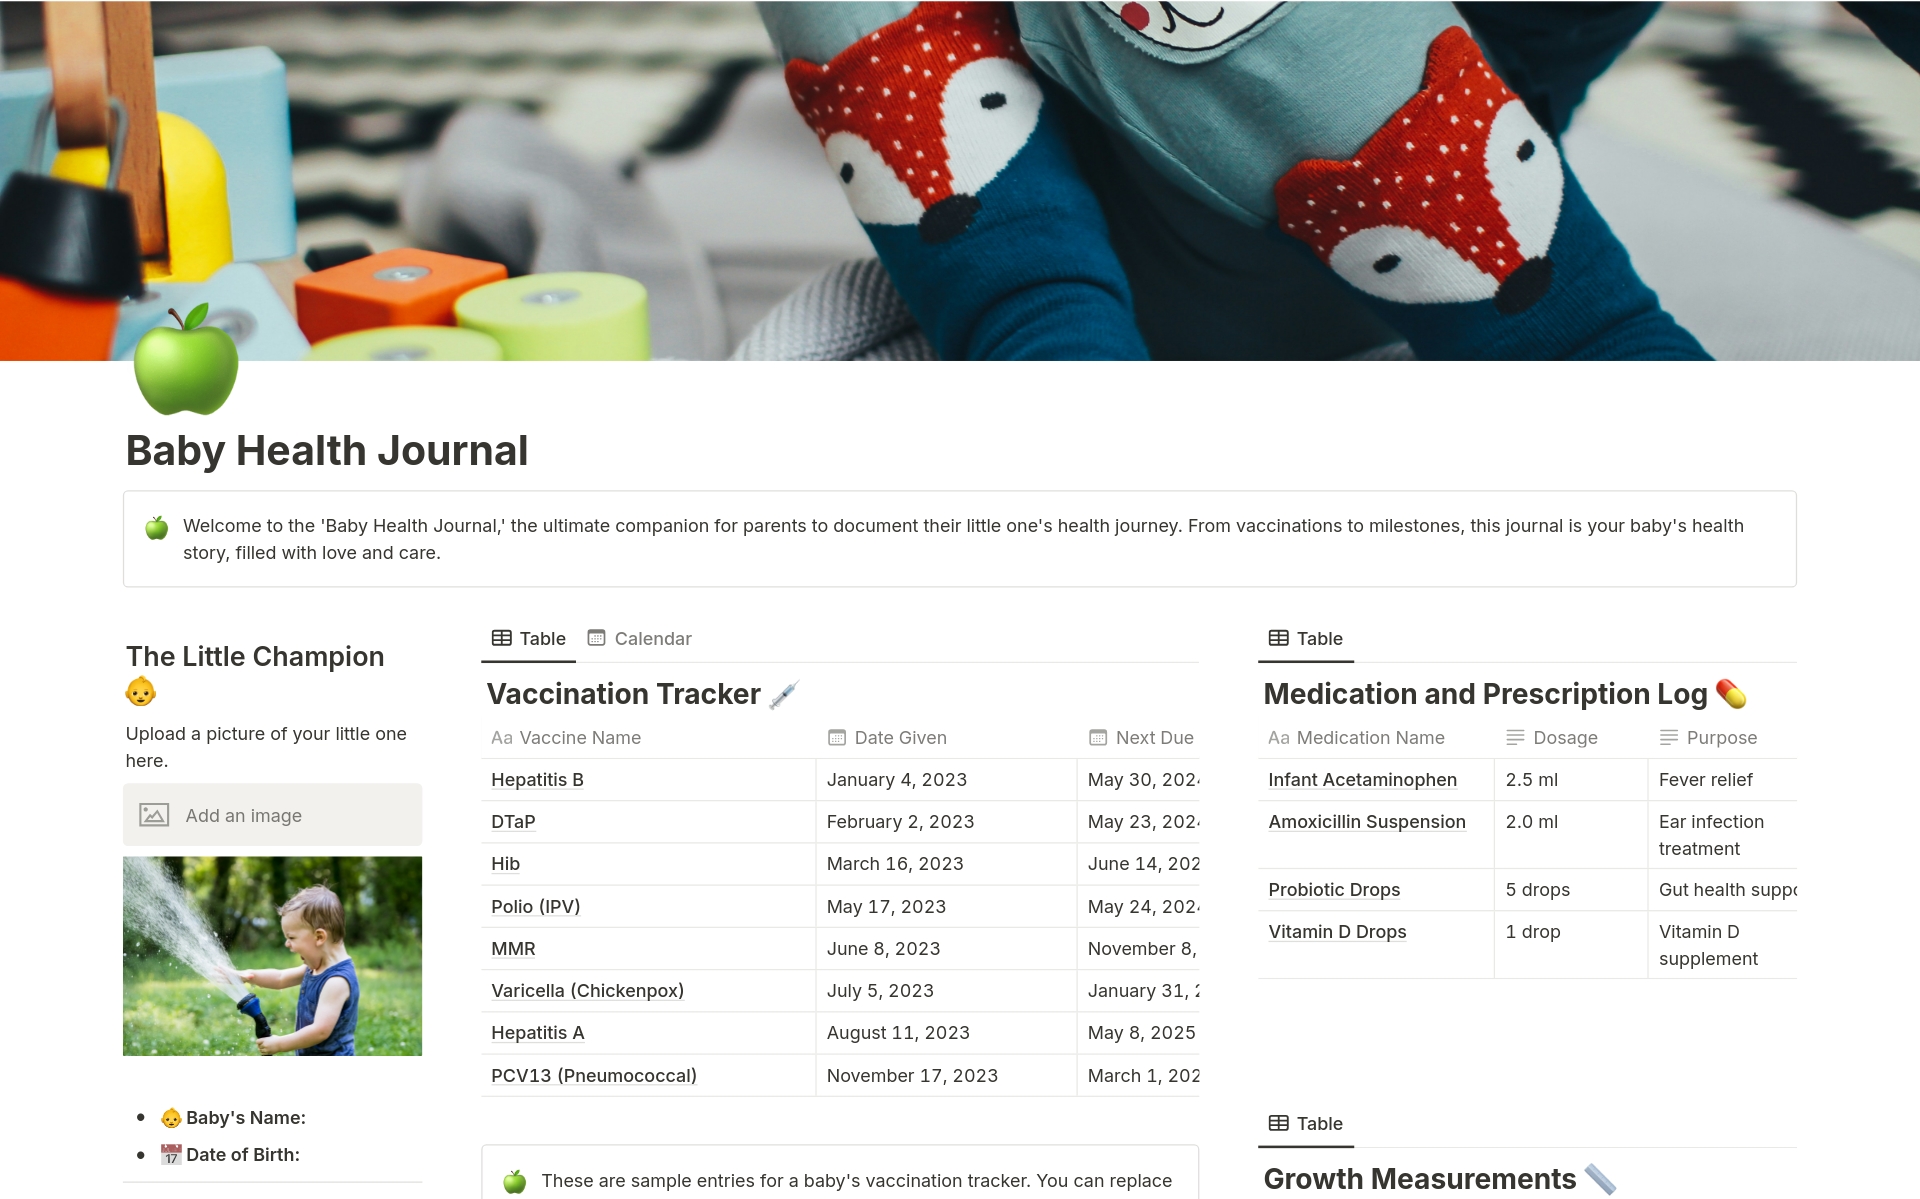 Explore our Notion Baby Health Journal Template: Includes sections for baby profiles, vaccination records, doctor visits, medication logs, and growth tracking. Designed for parents seeking an organized approach to monitoring their baby's health and development milestones.